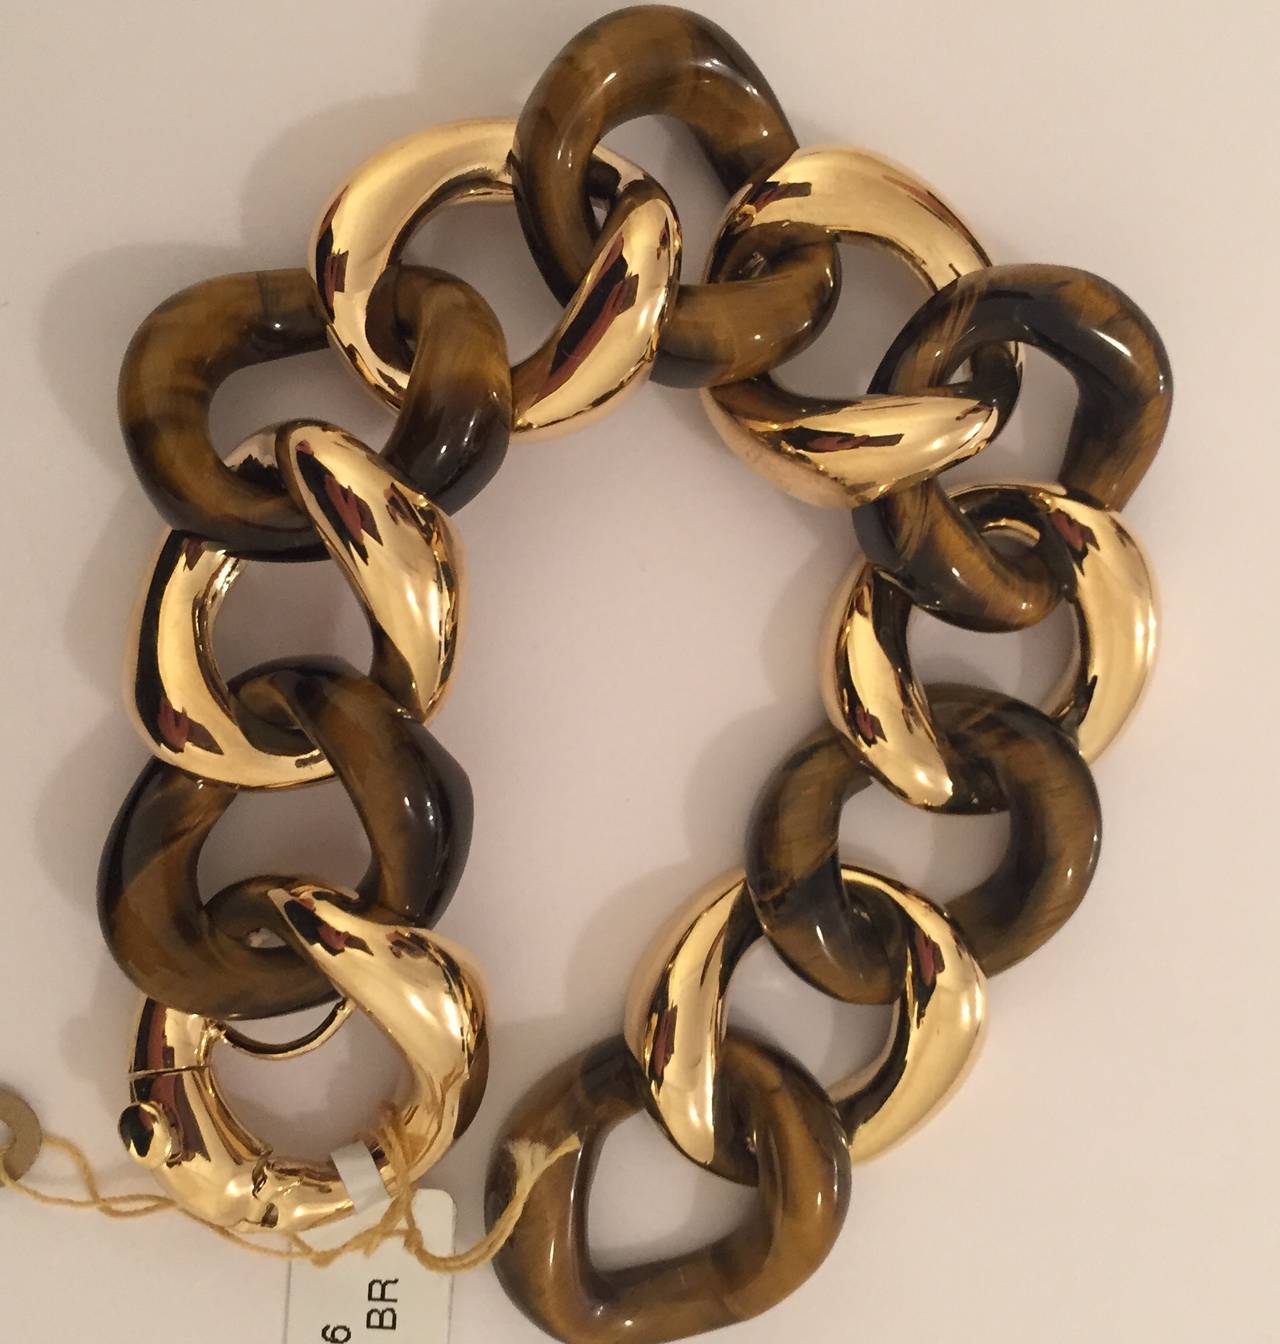 Elegant 18kt Yellow Gold and Tigers eye curved link bracelet with self link closure.  The fabulous bracelet measure 7 1/2 inches but can be made to any measurement.  The gold and Tigers eye links measure approximately 3/4